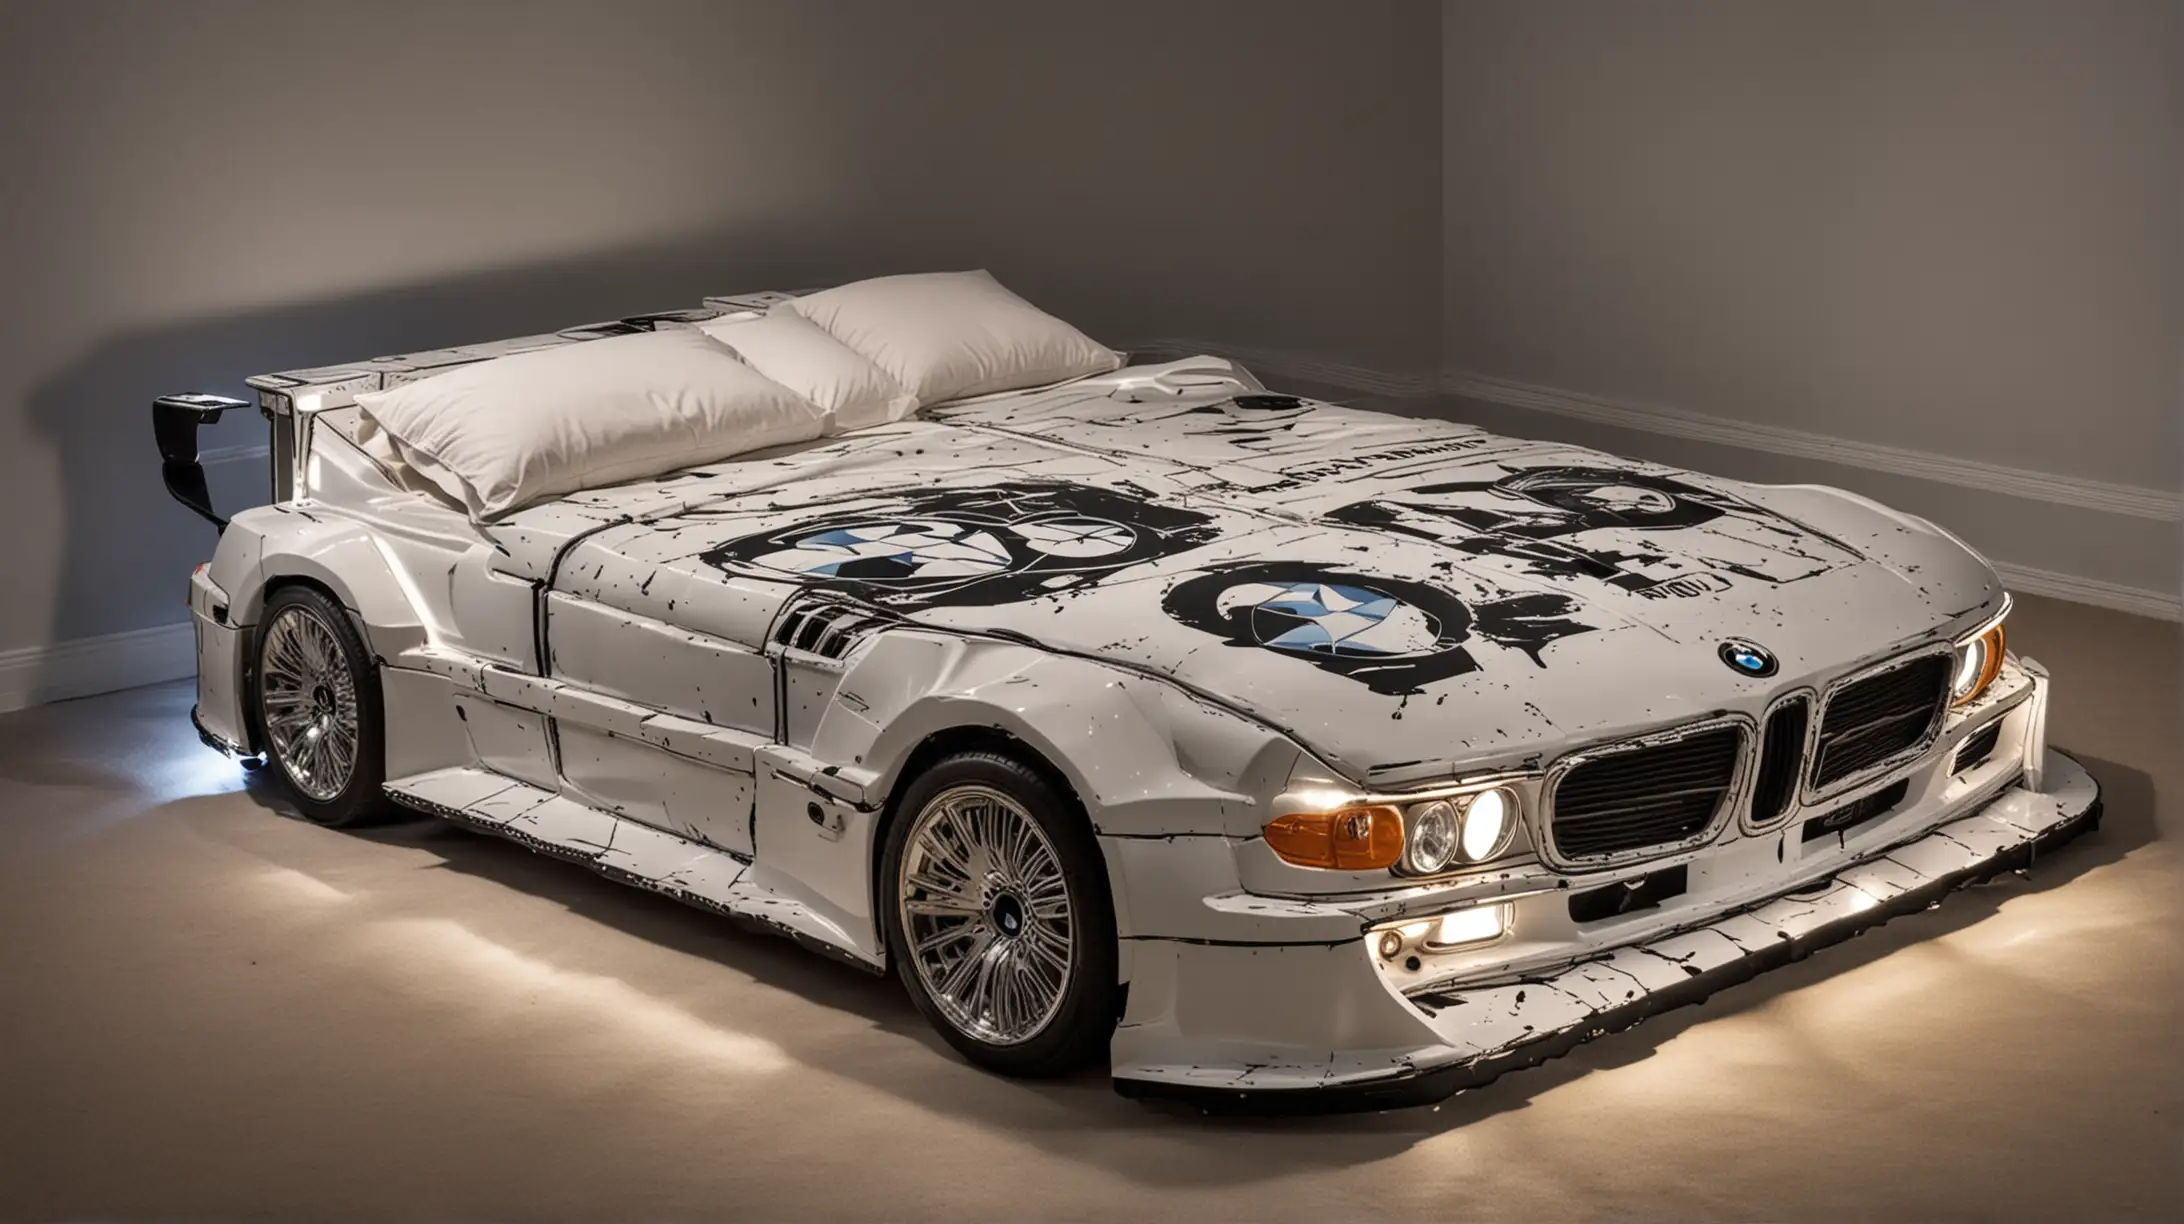 Luxurious BMW CarShaped Double Bed with Illuminated Headlights and Dollar Graphics